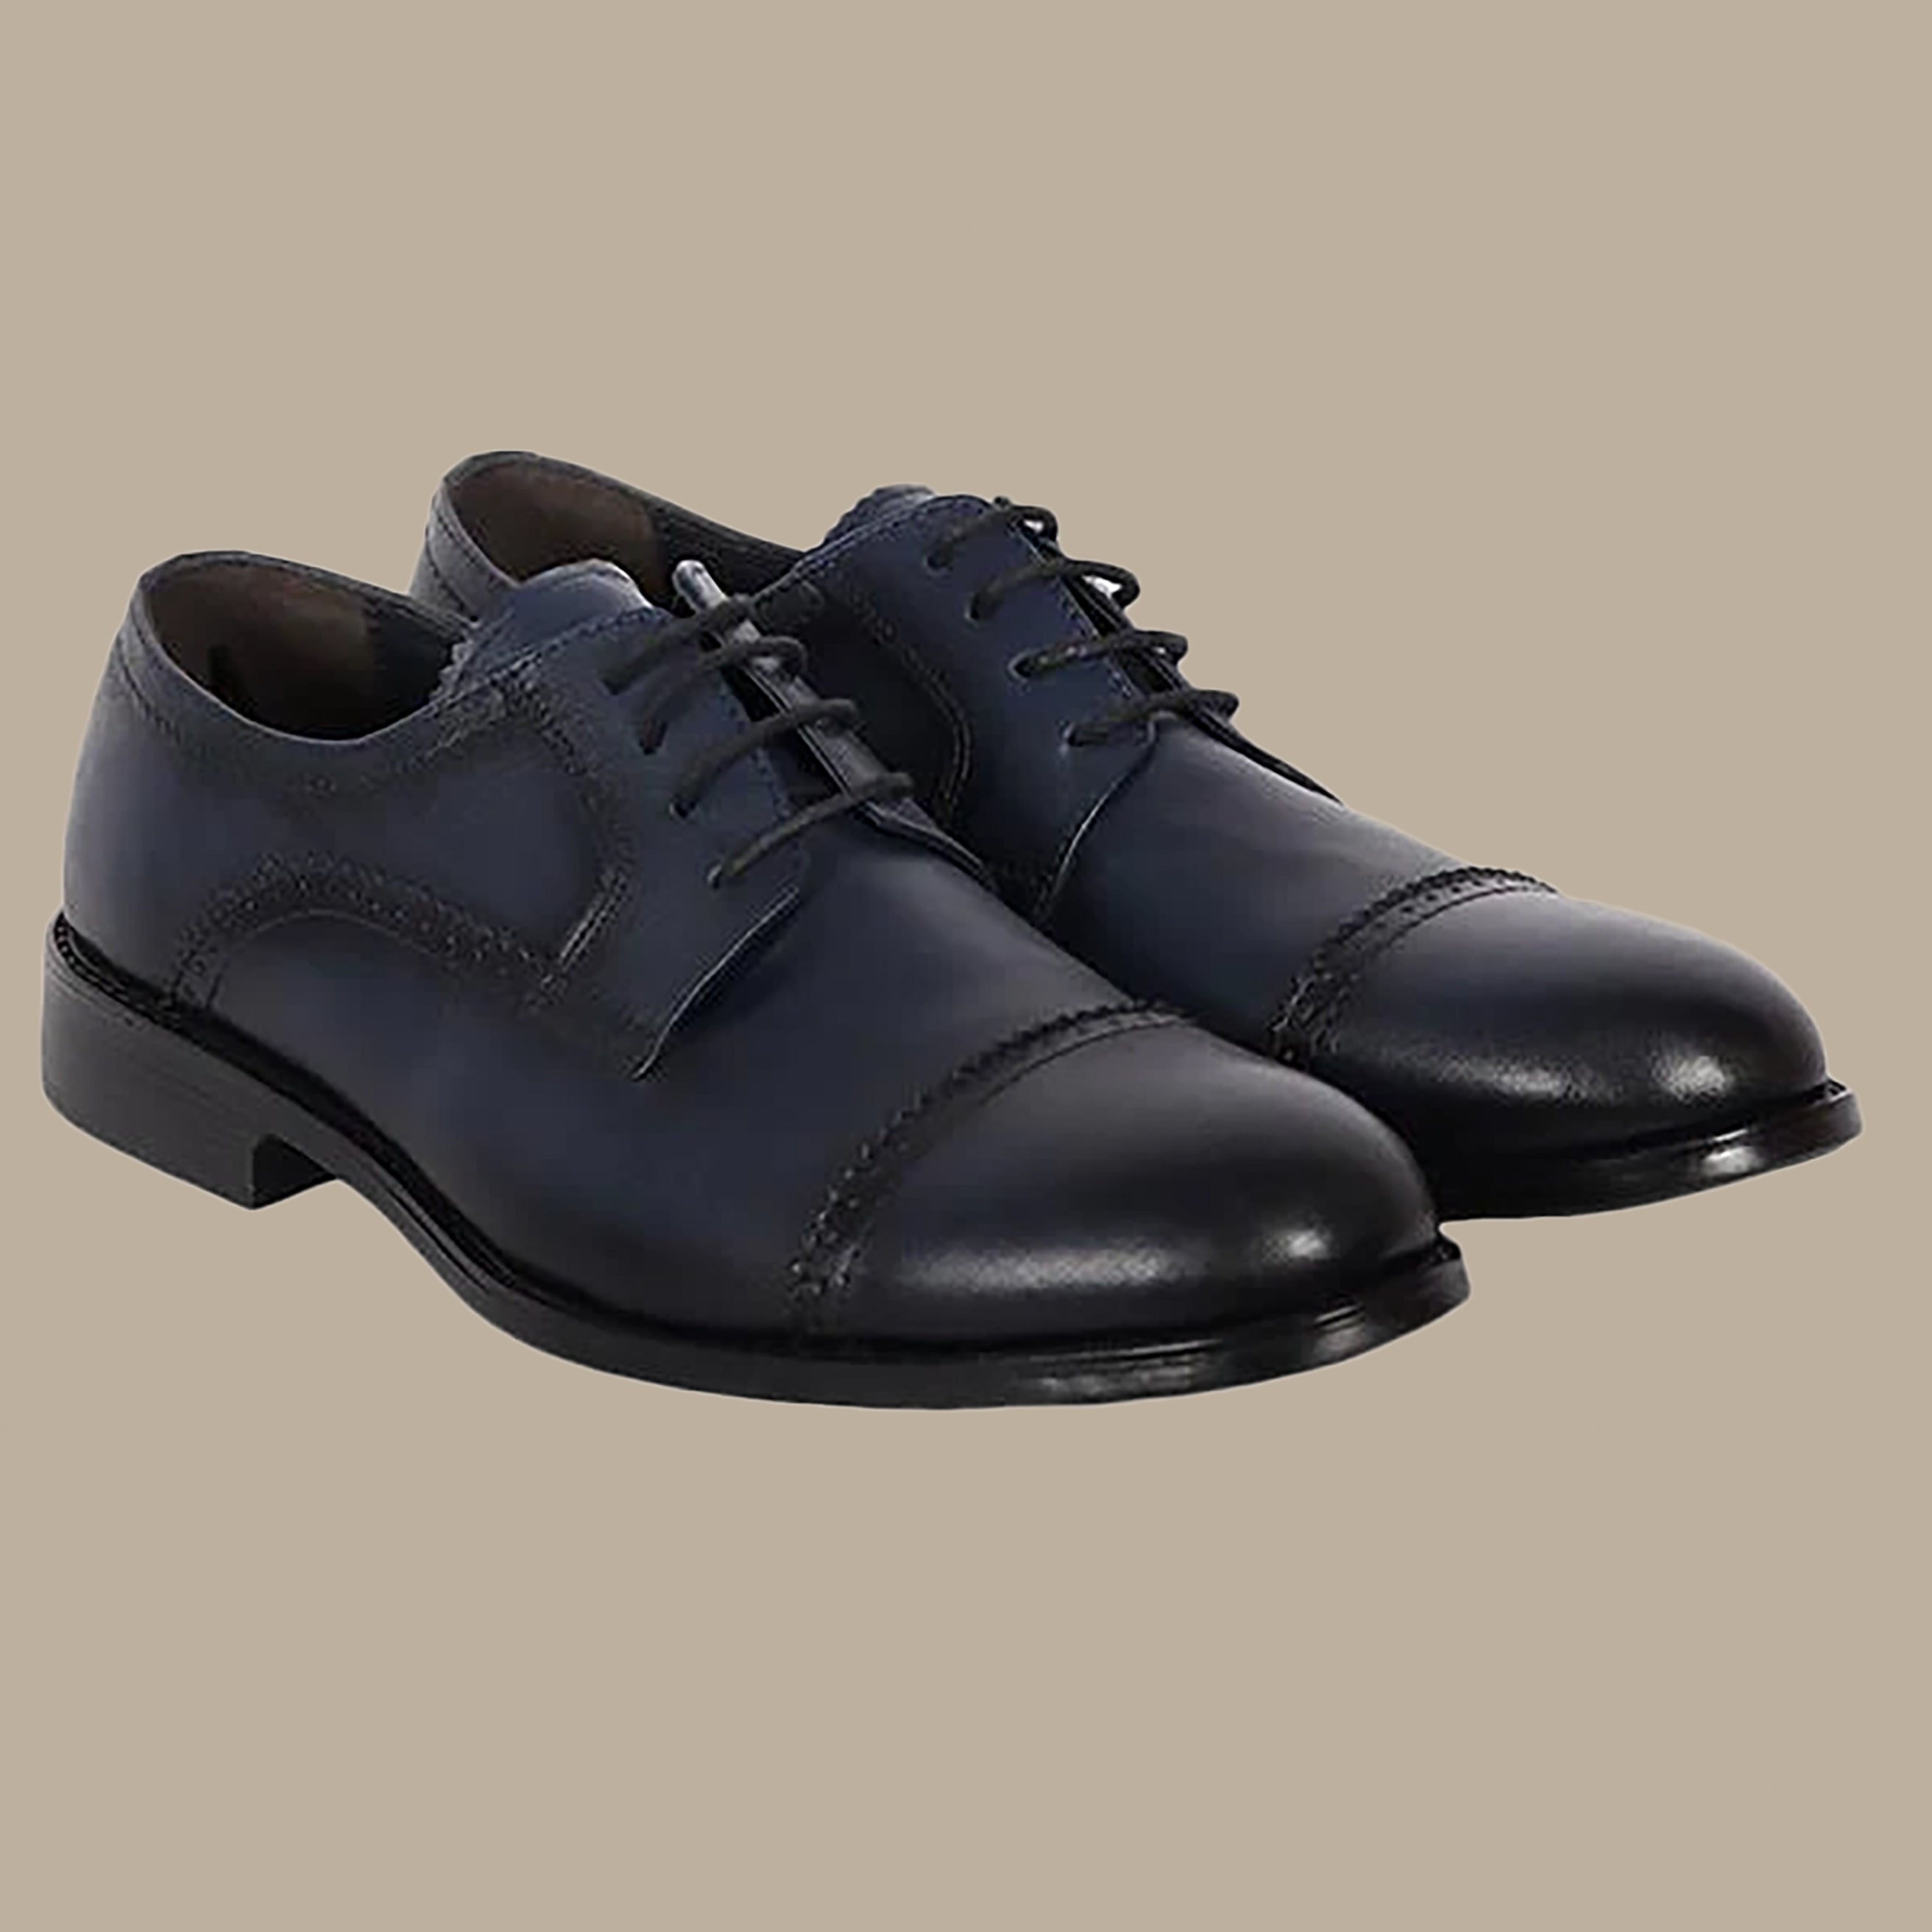 Shoes English Classic Oxford